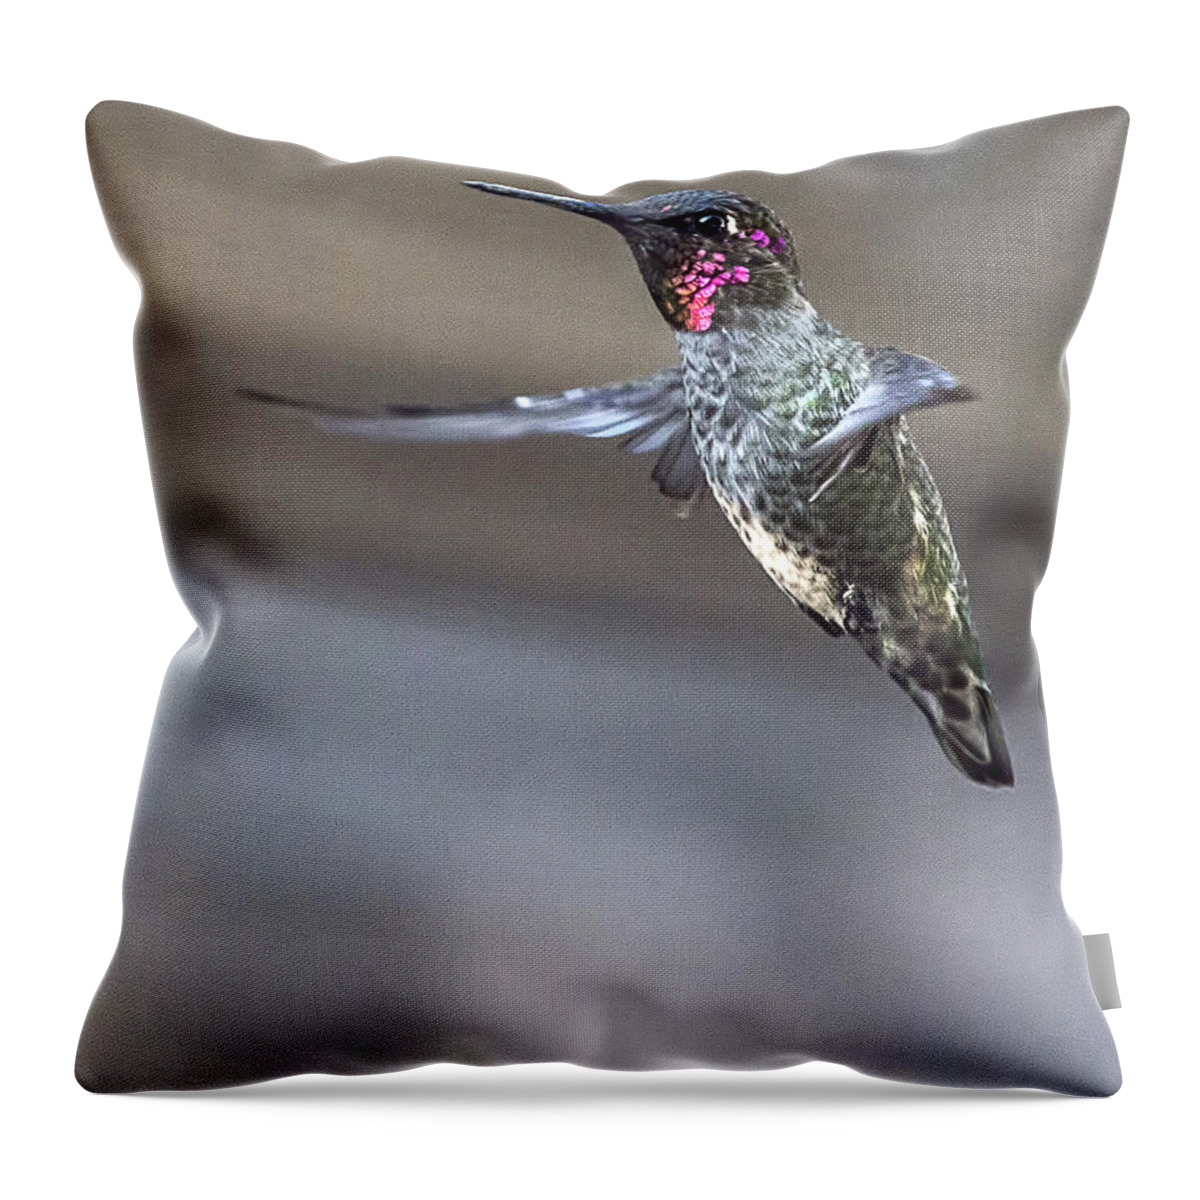 Endre Throw Pillow featuring the photograph Hummingbird 4 by Endre Balogh